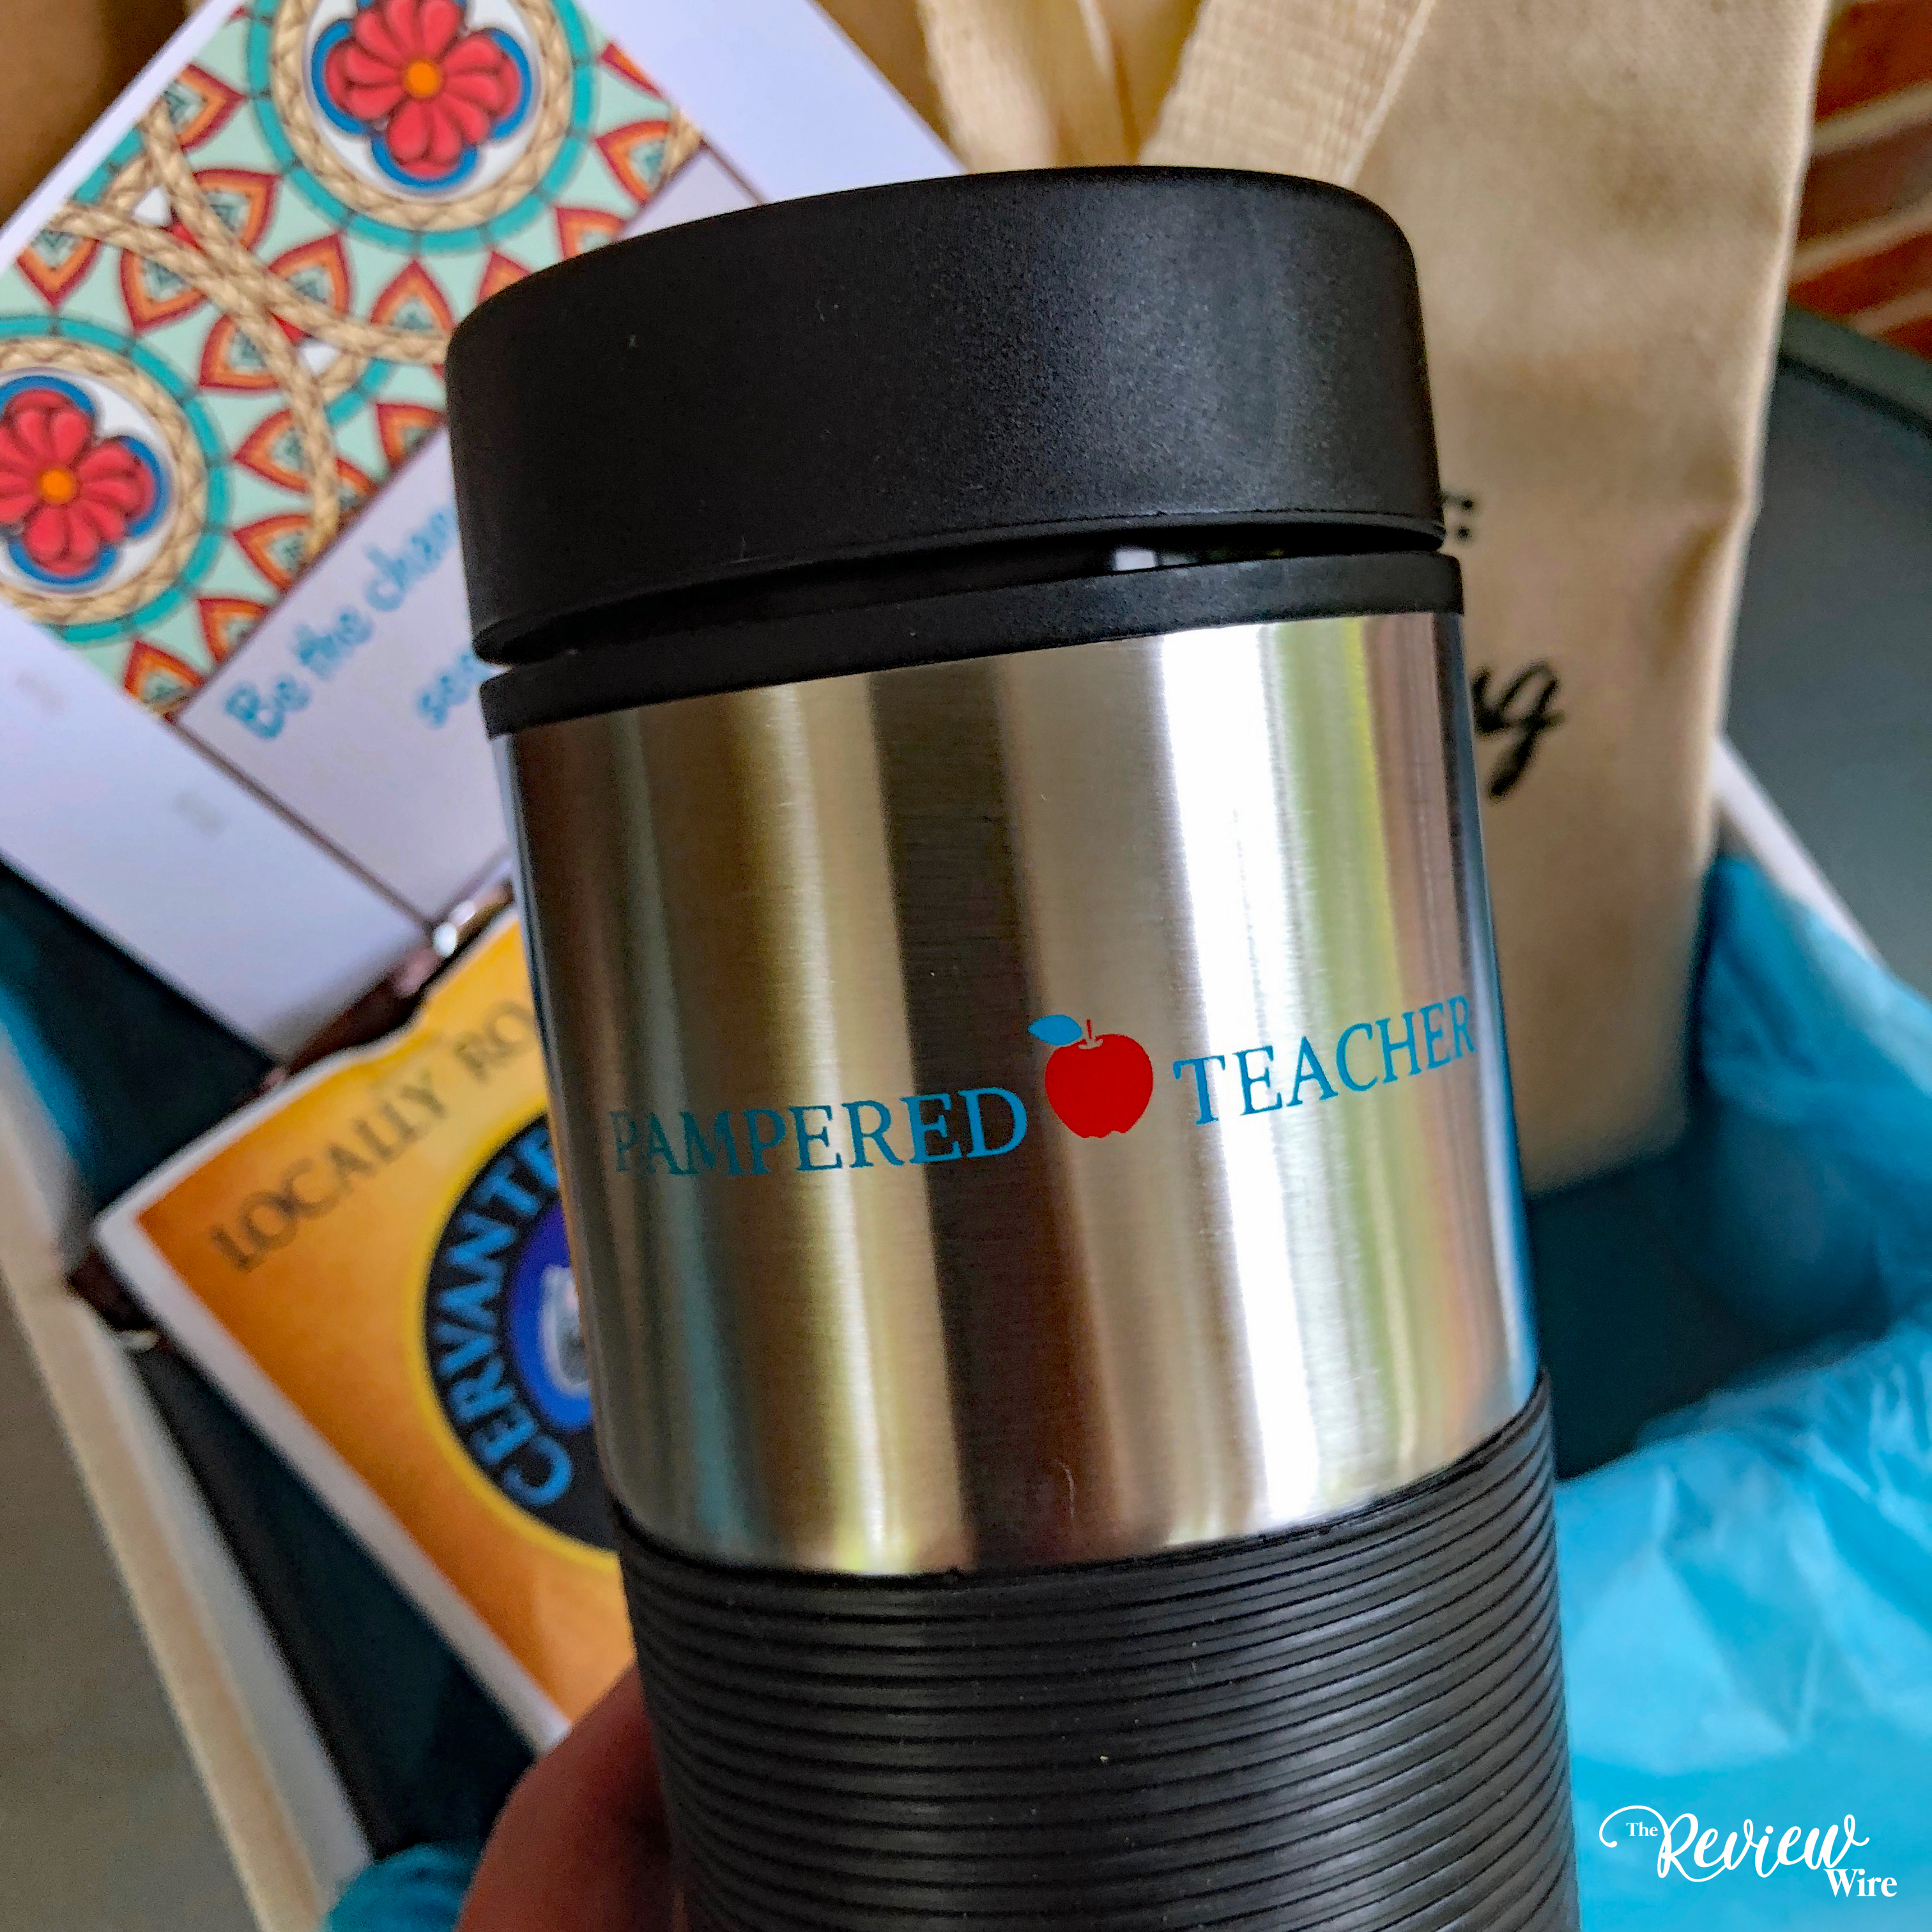 The Review Wire Pampered Teacher Travel Mug